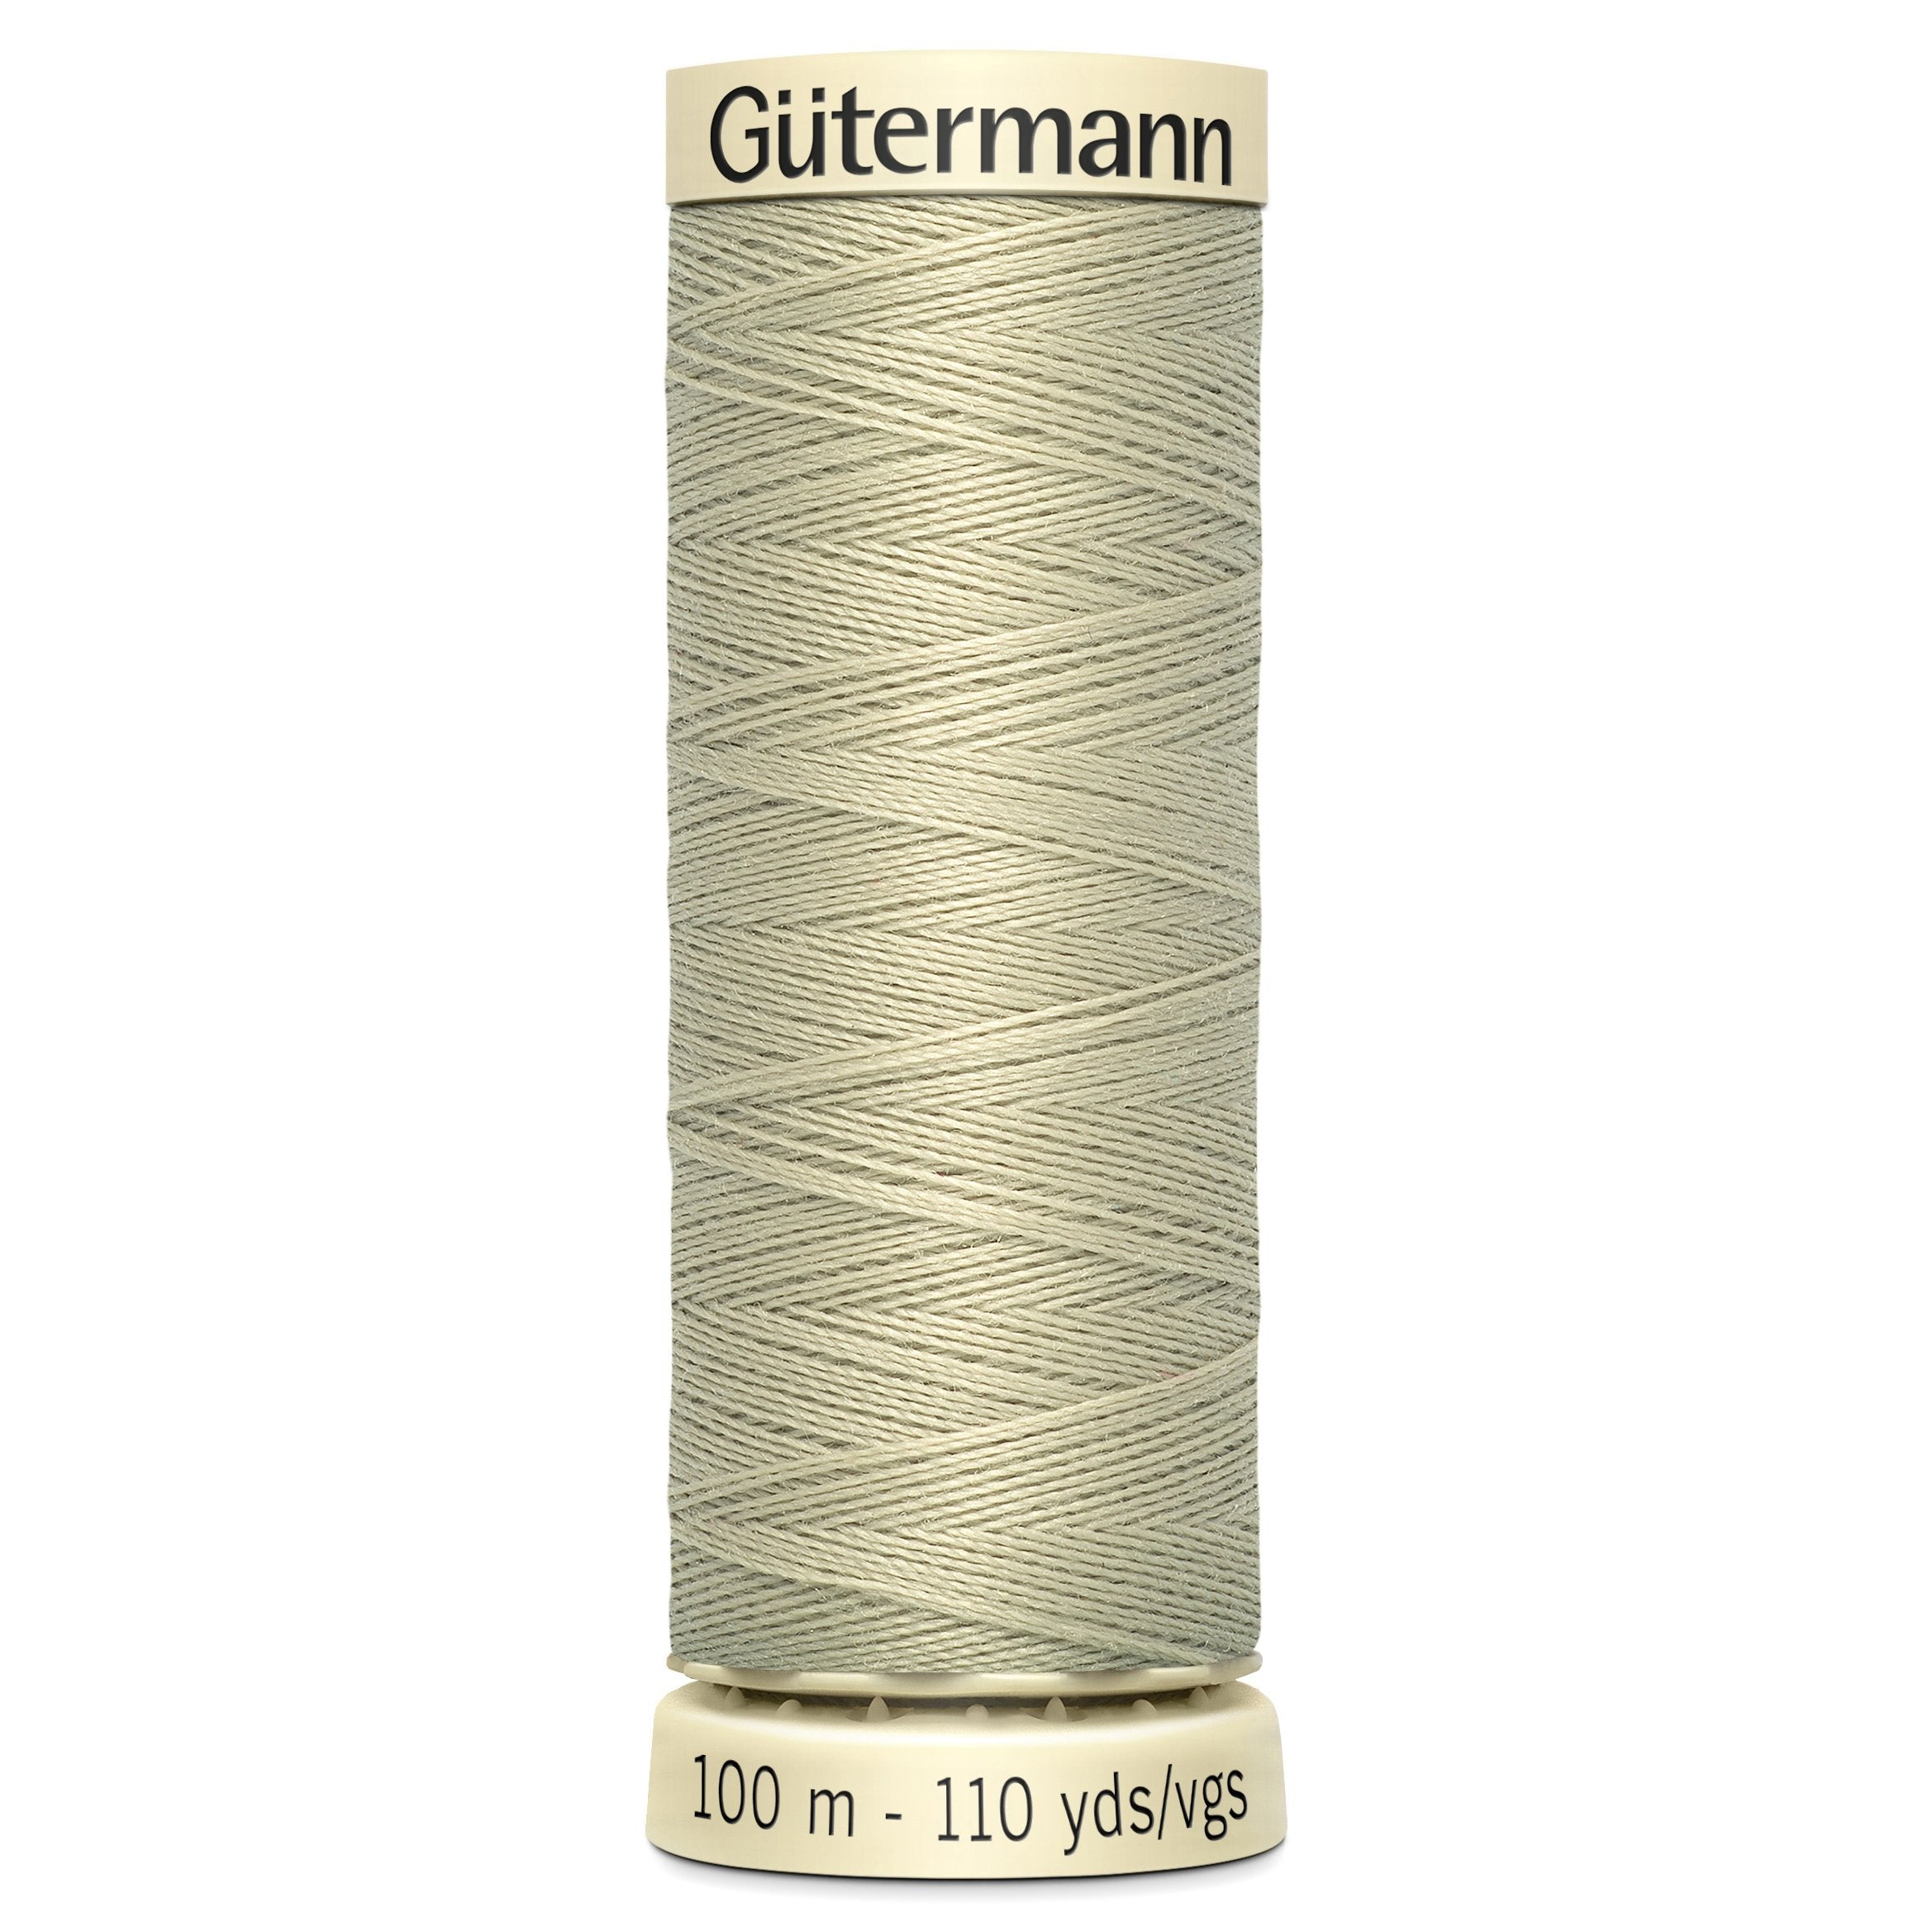 Gutermann Sew All Thread colour 503 Beige from Jaycotts Sewing Supplies